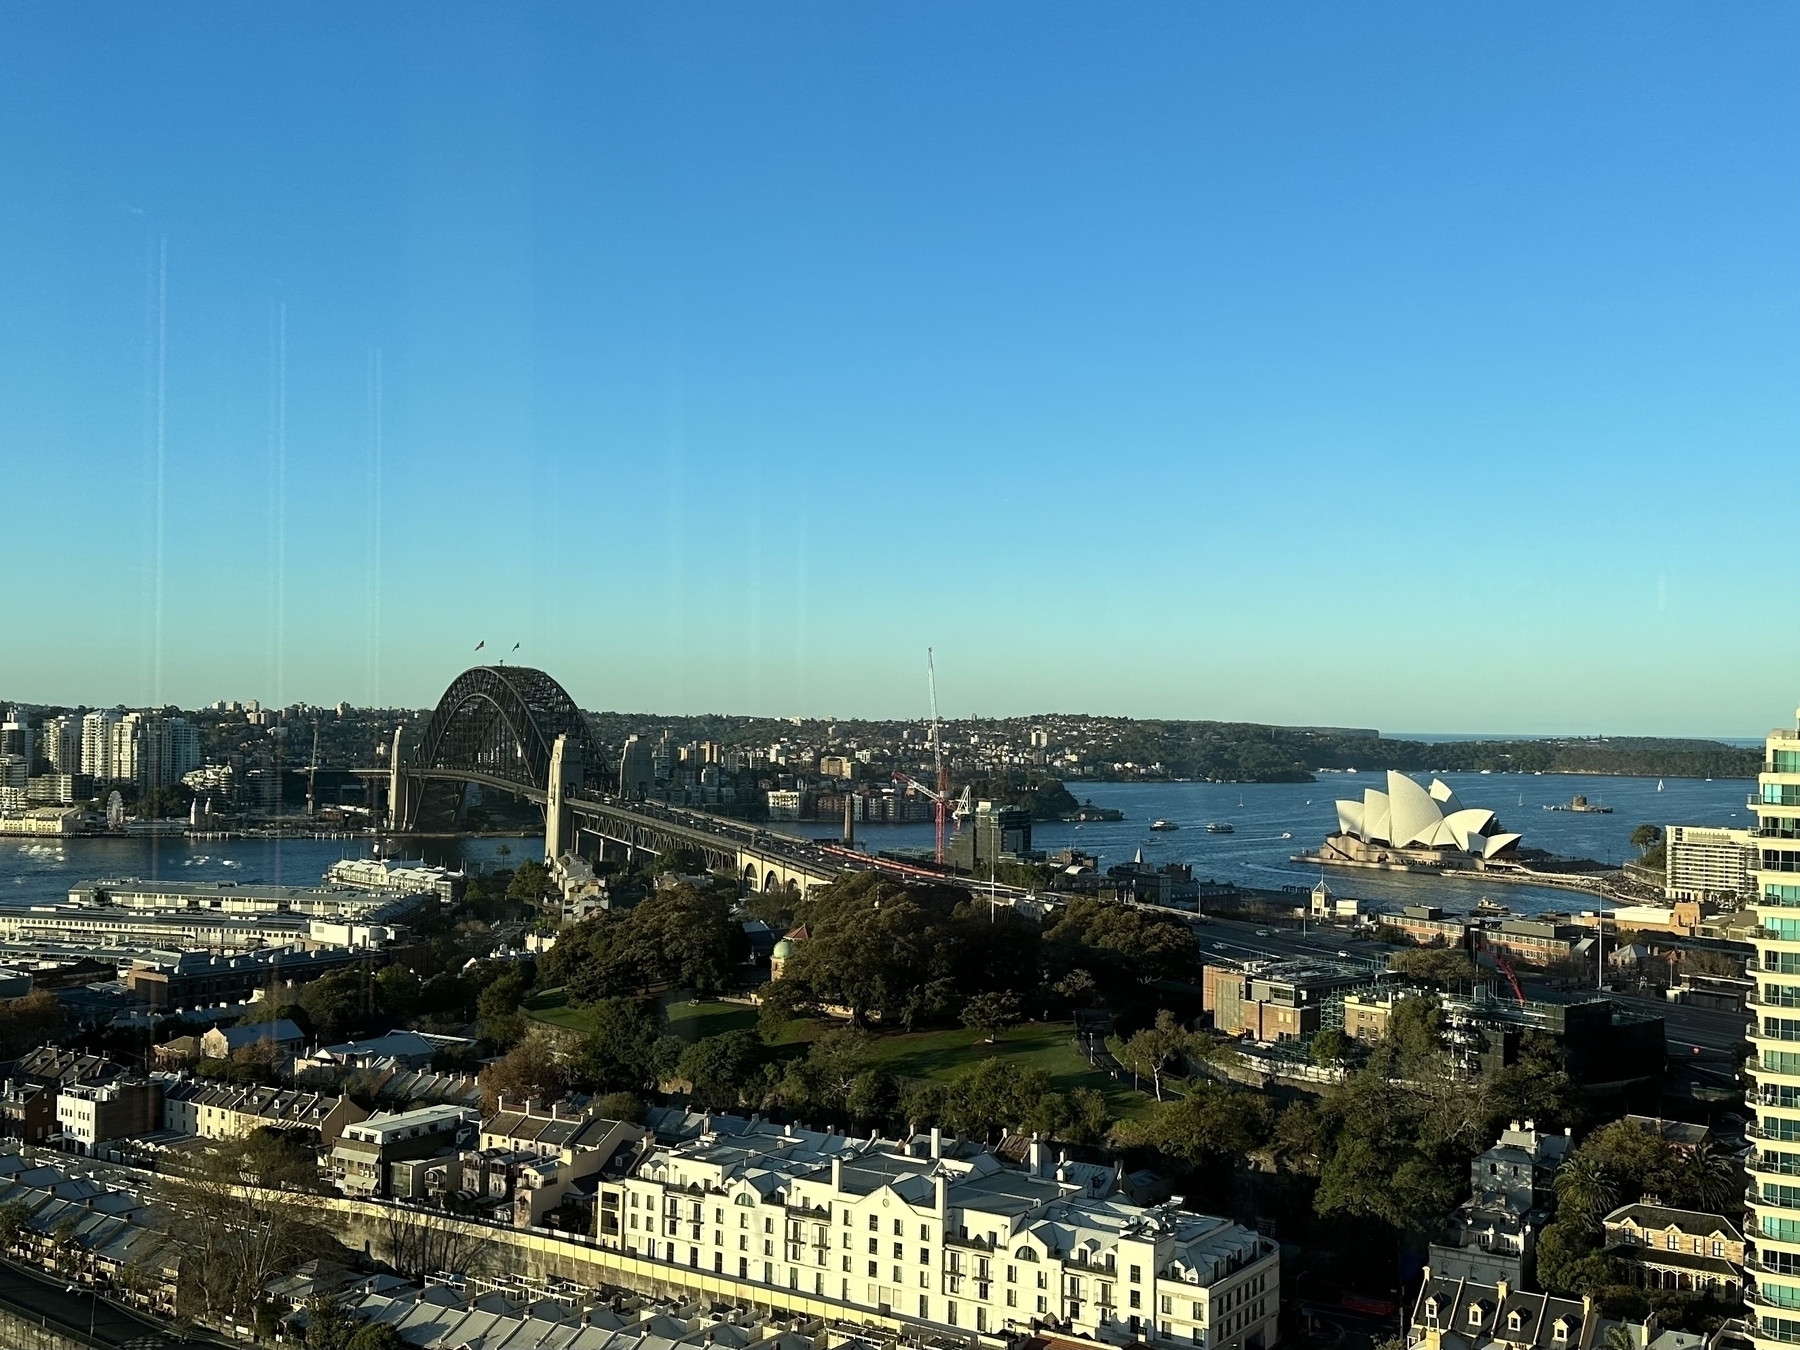 A view from the west looking towards the Sydney Harbour bridge and Opera House.